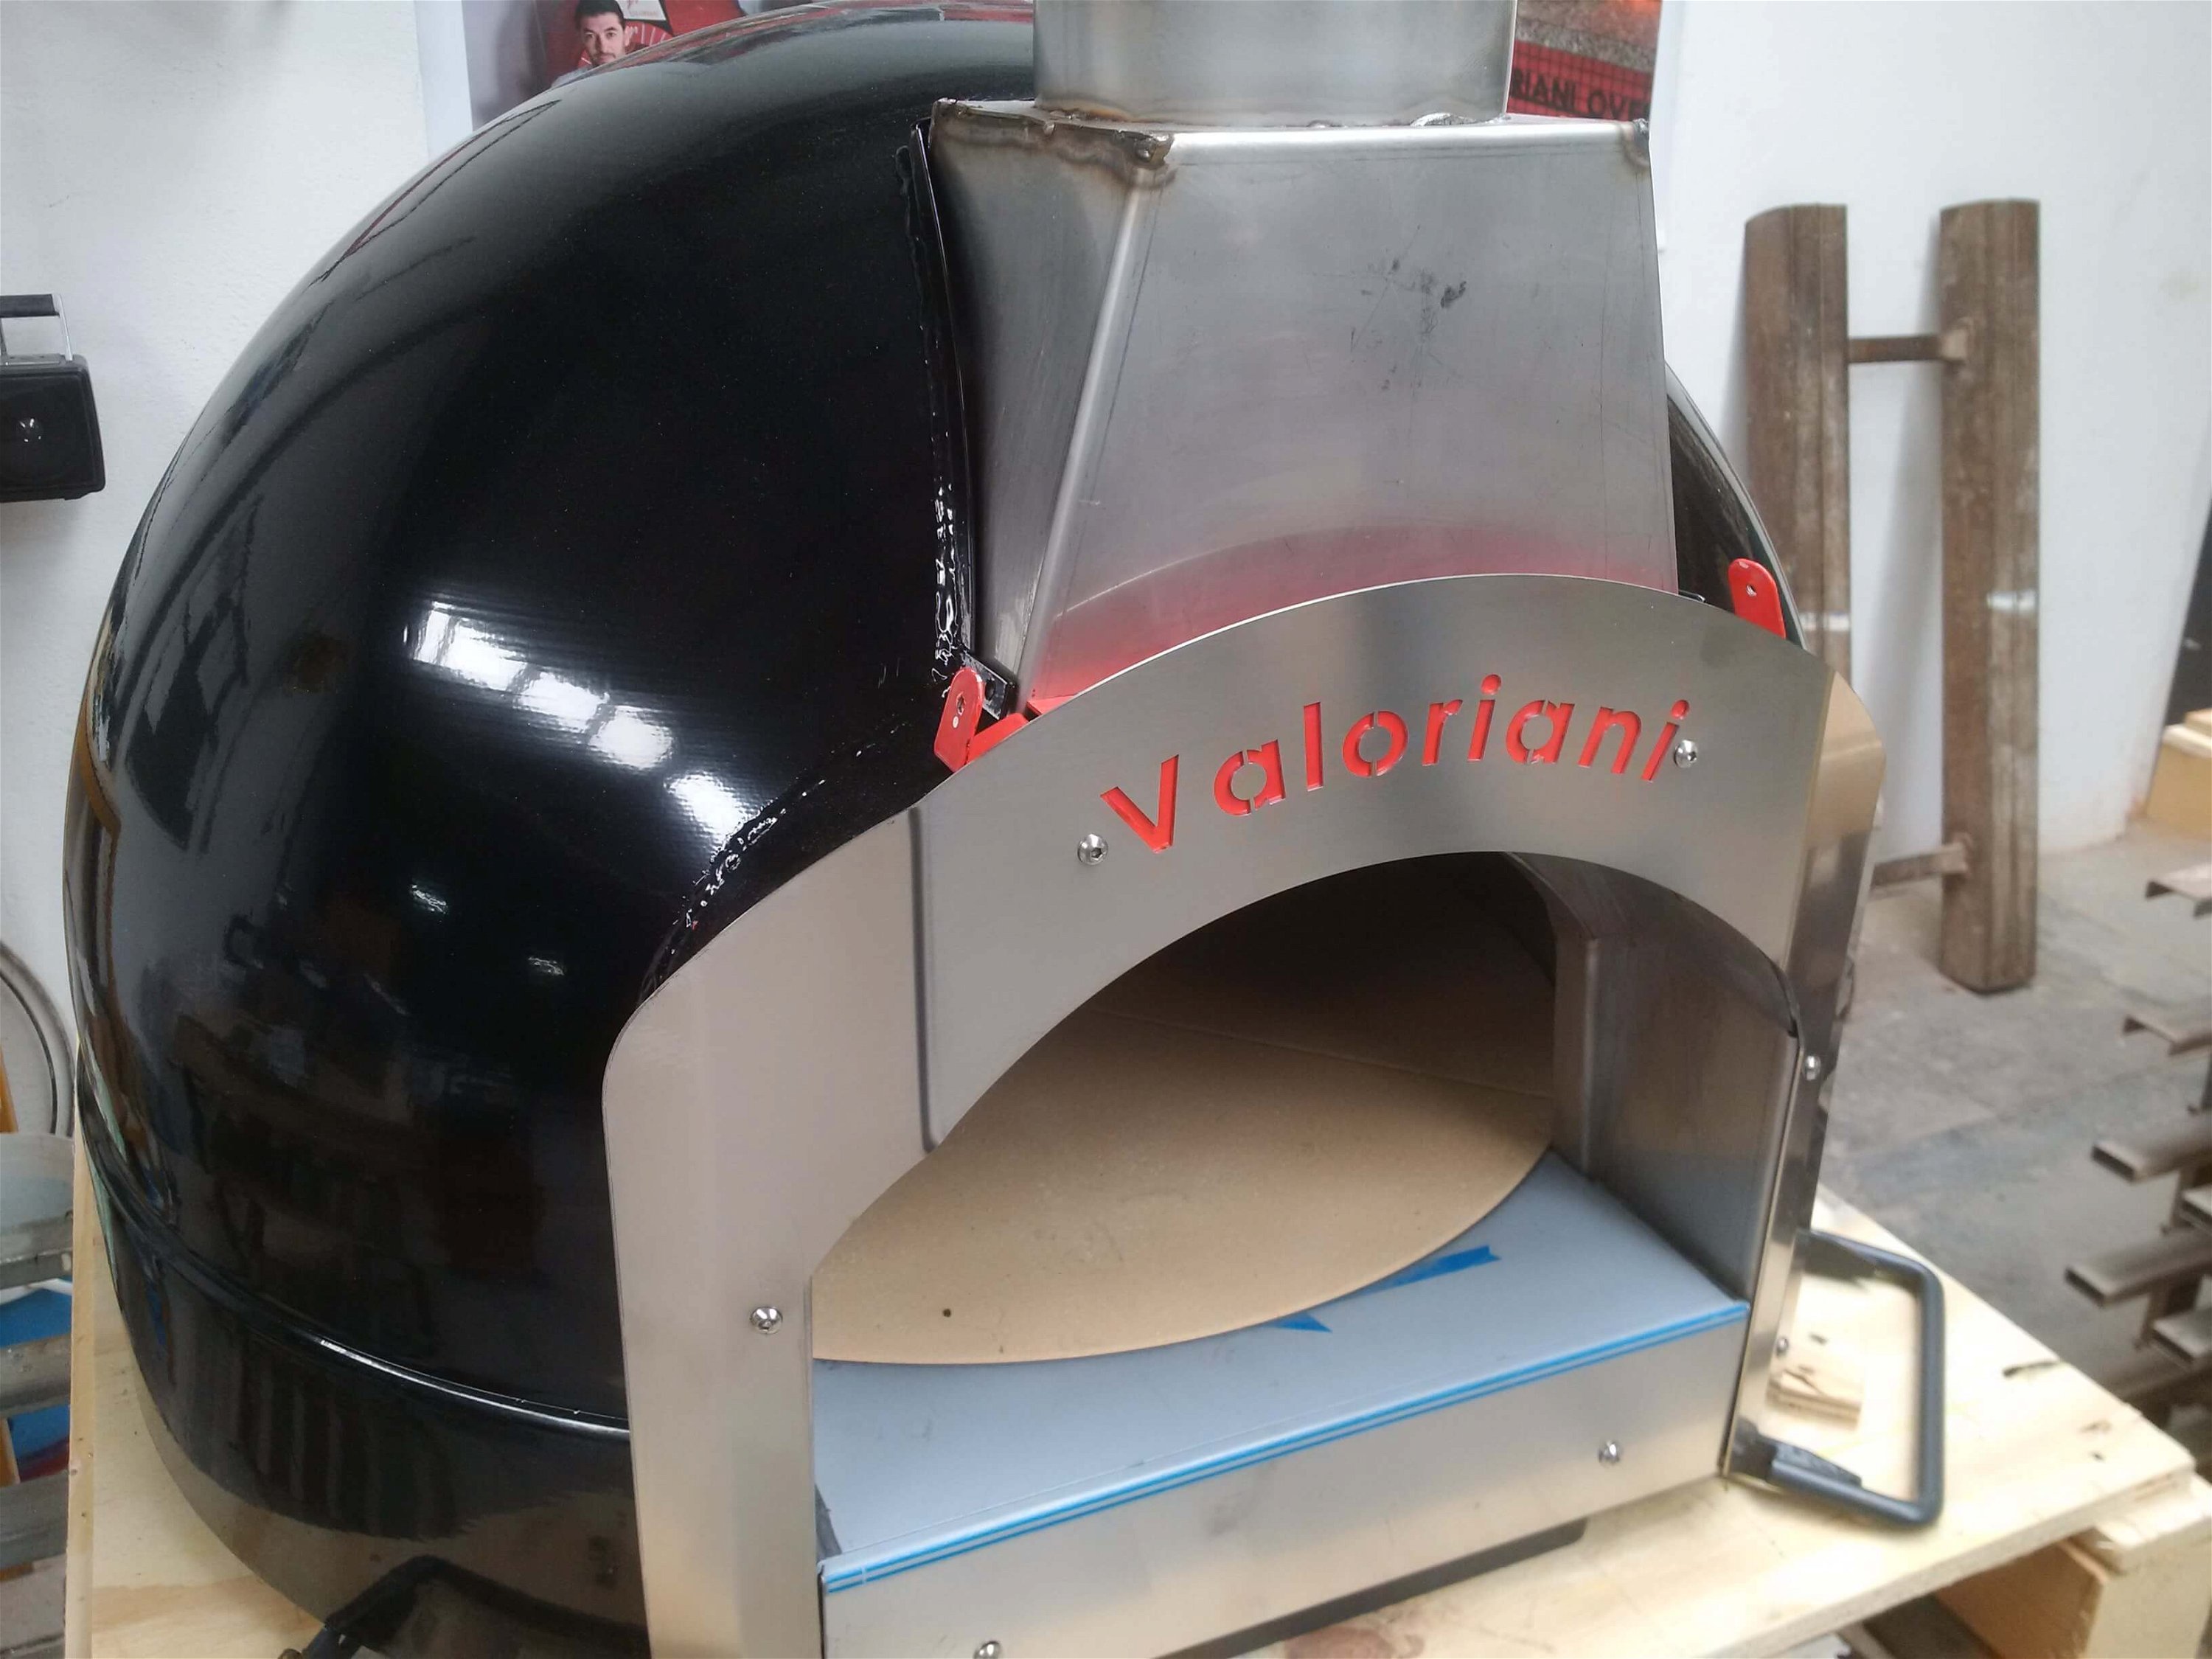 Wood oven Valoriani Baby, 60cm diameter, incl. complete base, red